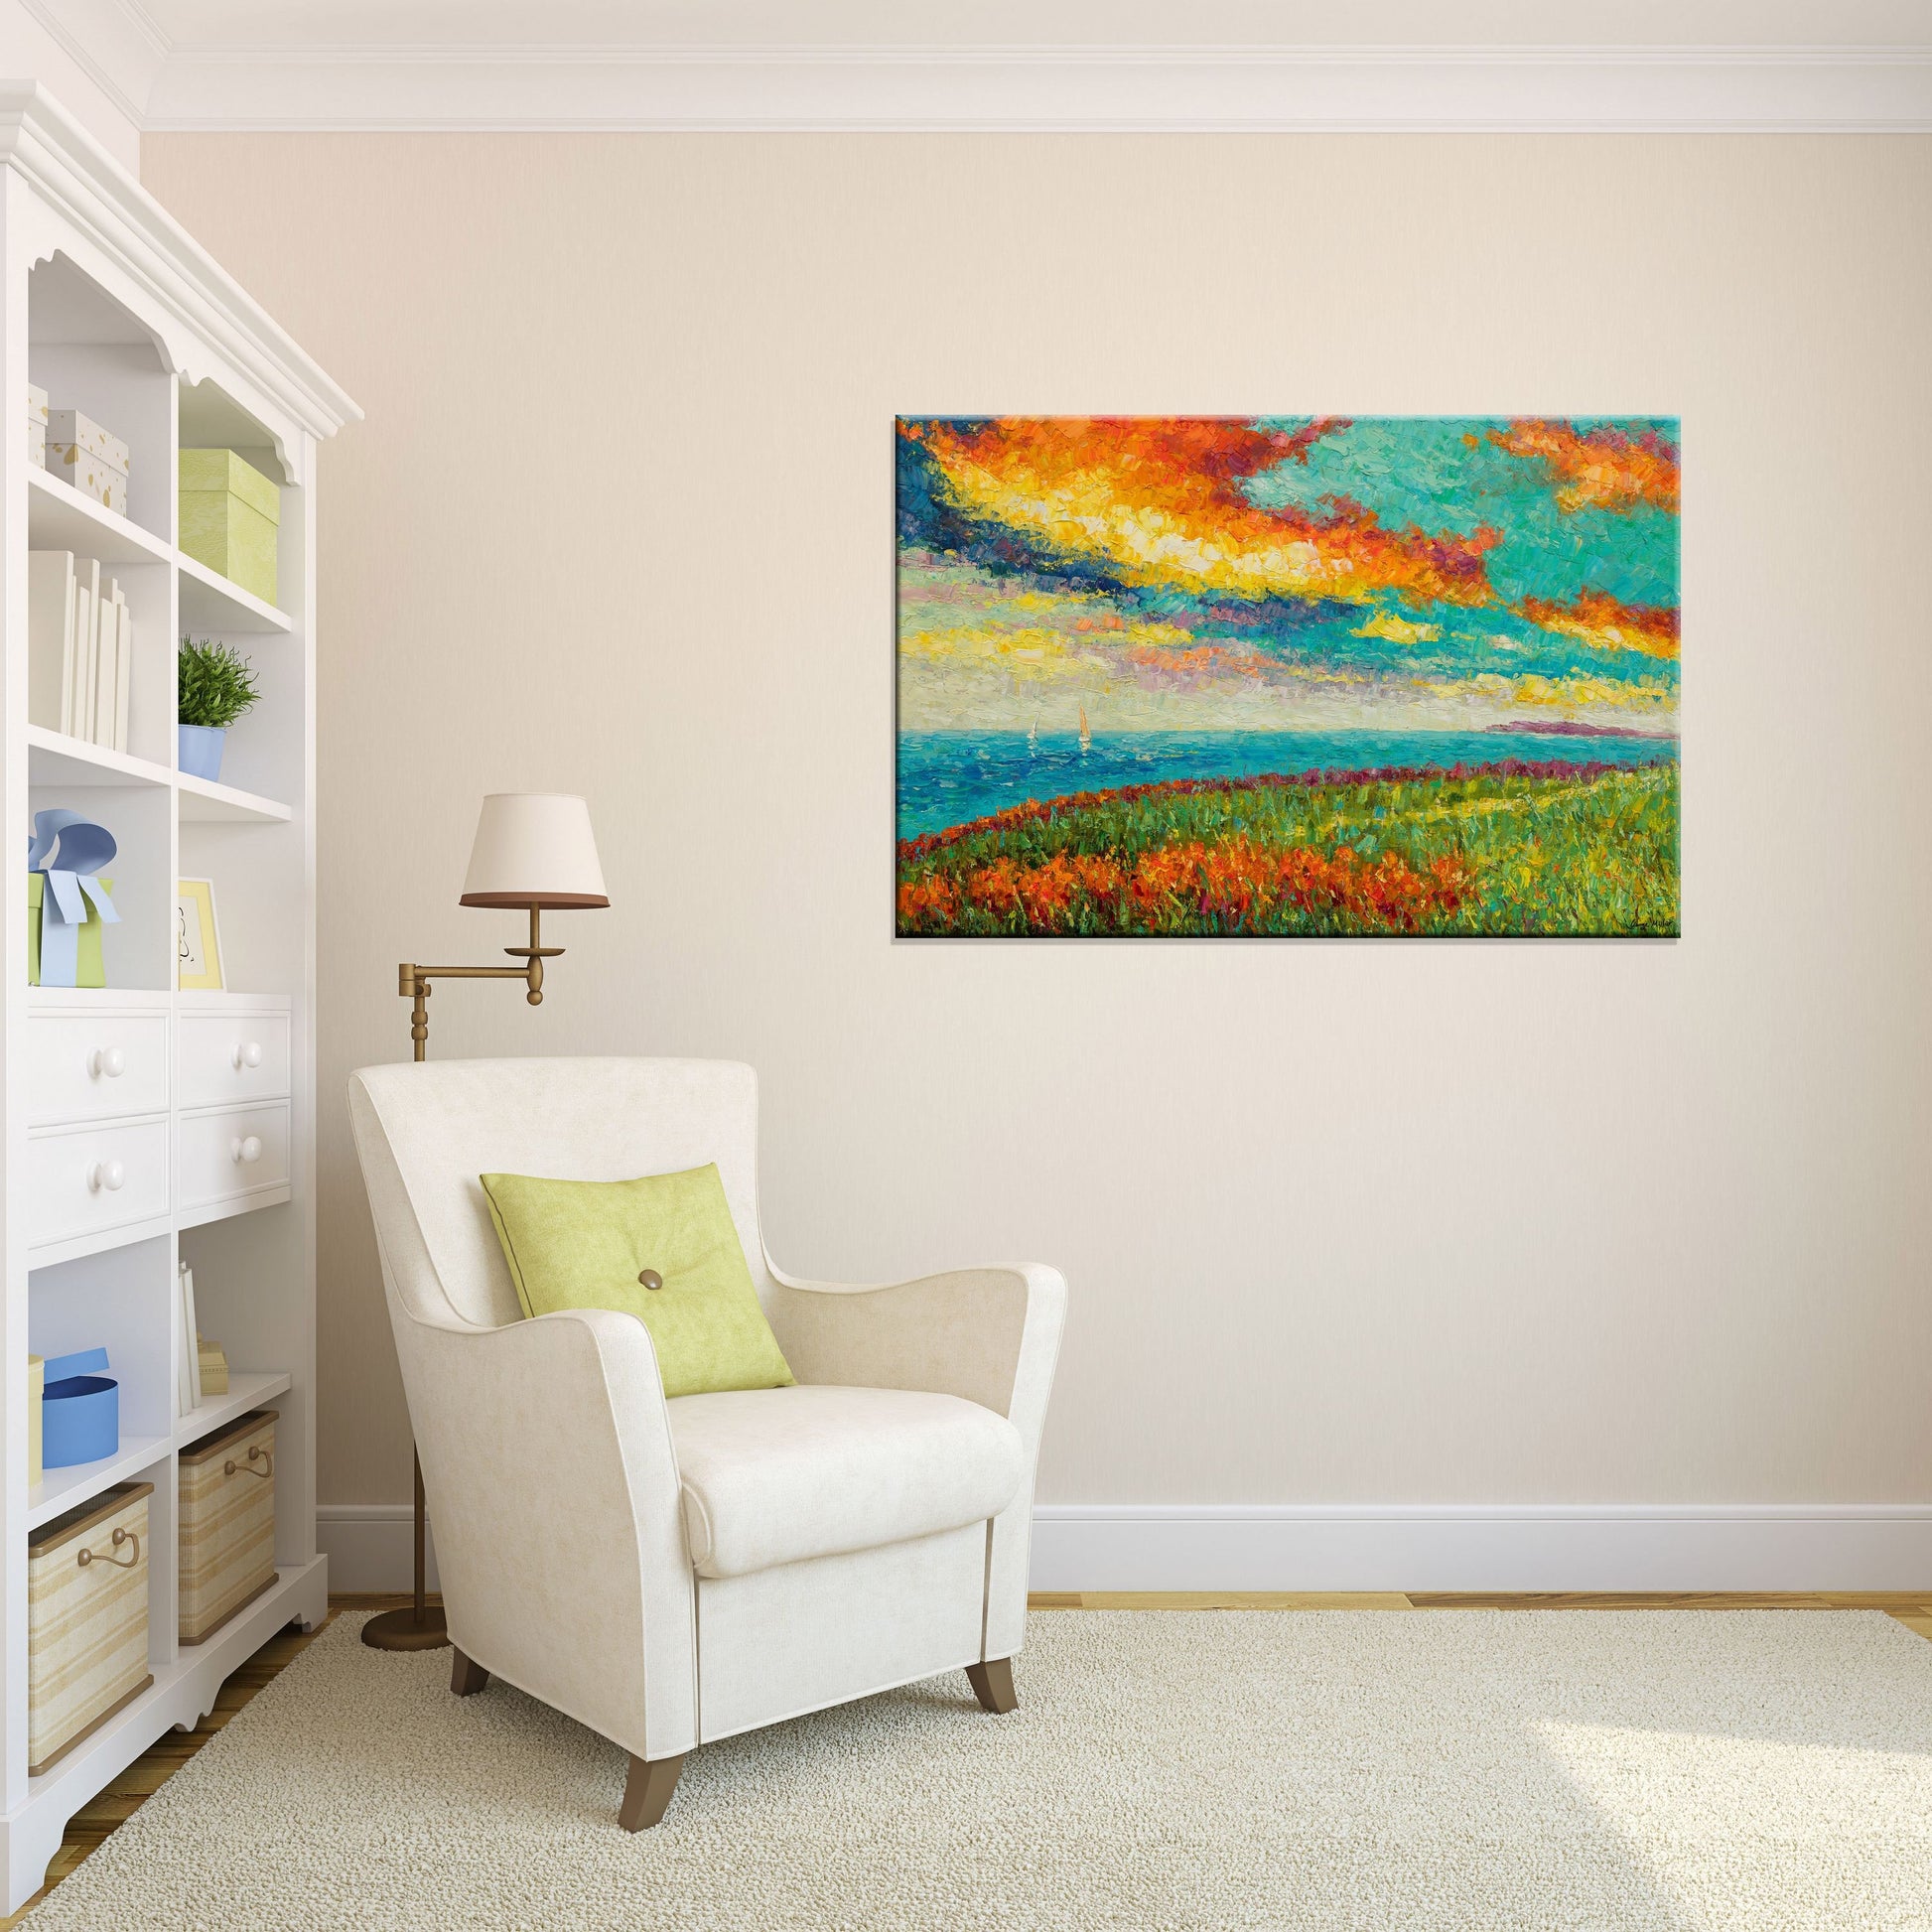 Oil Painting by the Seashore, Abstract Canvas Art, Original Oil Painting, Living Room Art, Landscape Painting, Modern Painting, Large Art